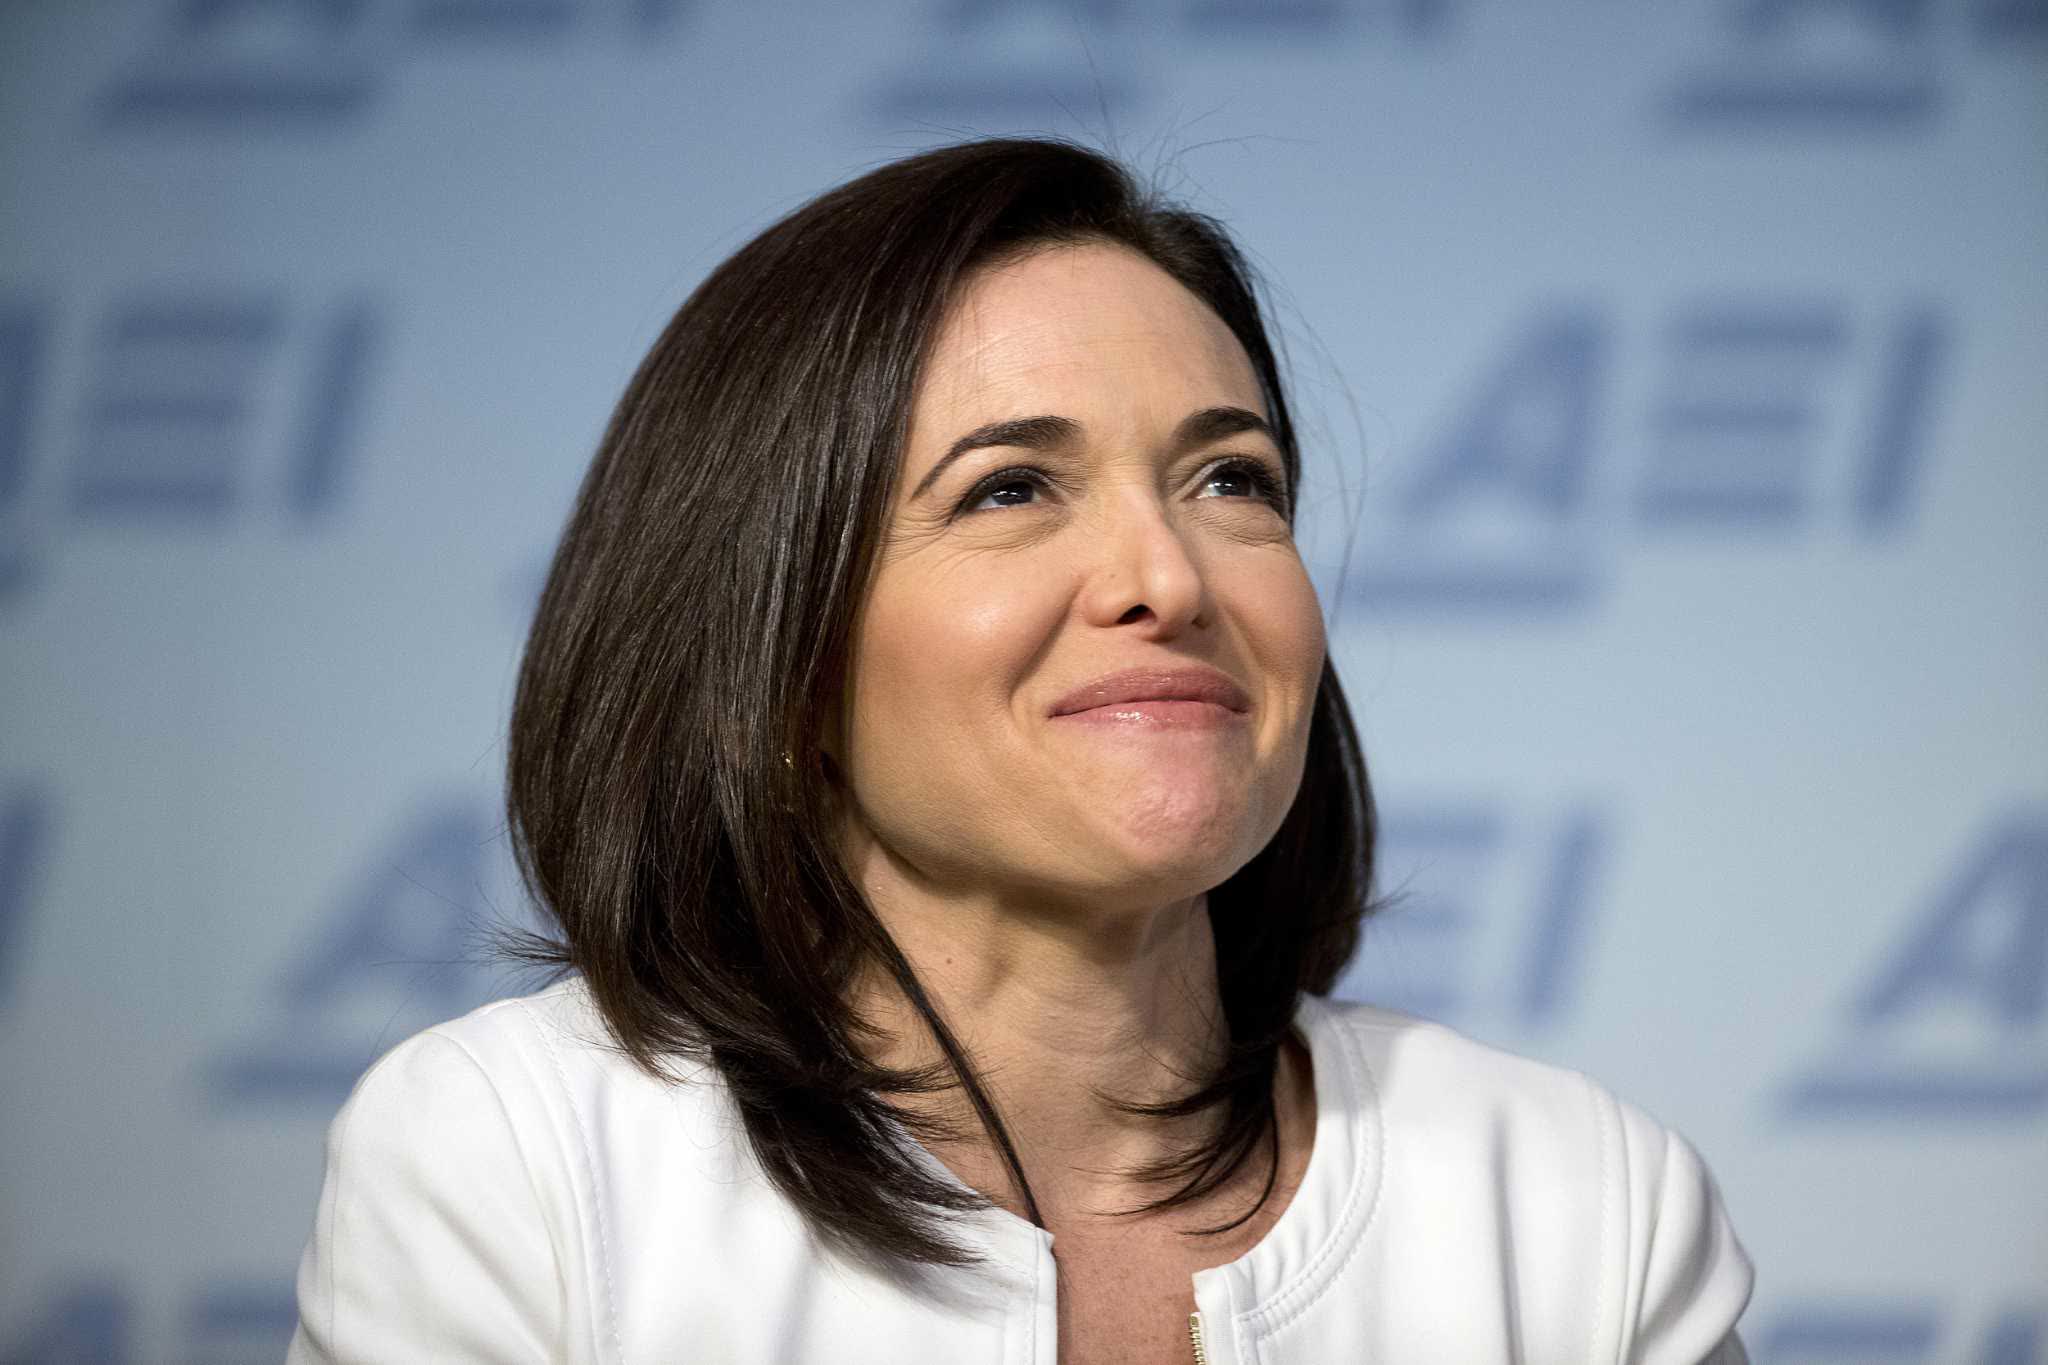 Facebook/Meta COO Sheryl Sandberg will step down after 14 years of service